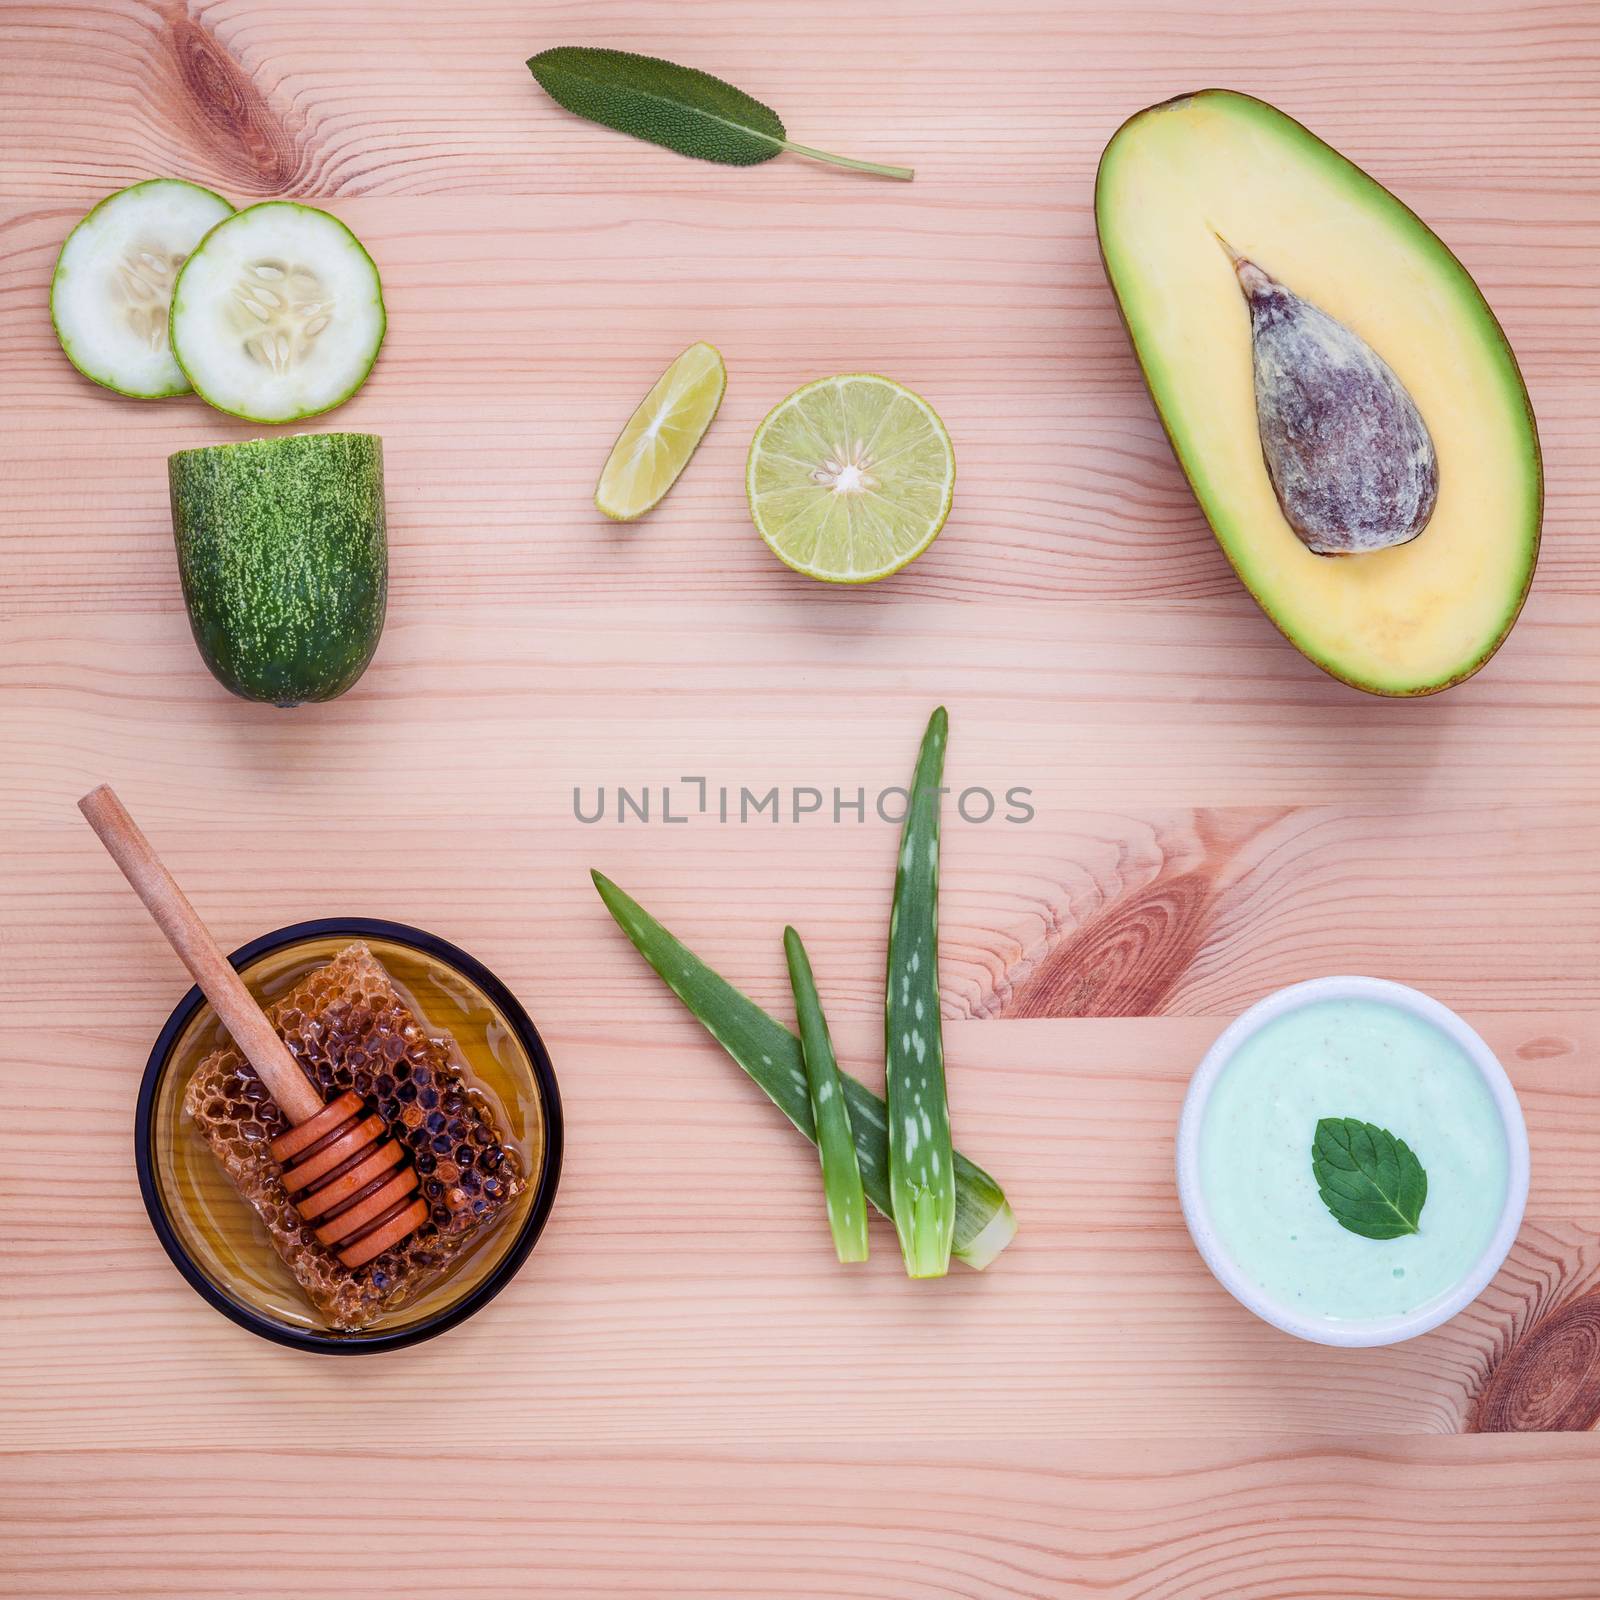 Homemade skincare and body scrubs with natural ingredients avocado ,aloe vera ,lemon ,cucumber sliced ,sea salt ,peppermint leaves ,sage leaves ,avocado scrubs and honey set up on wooden background.